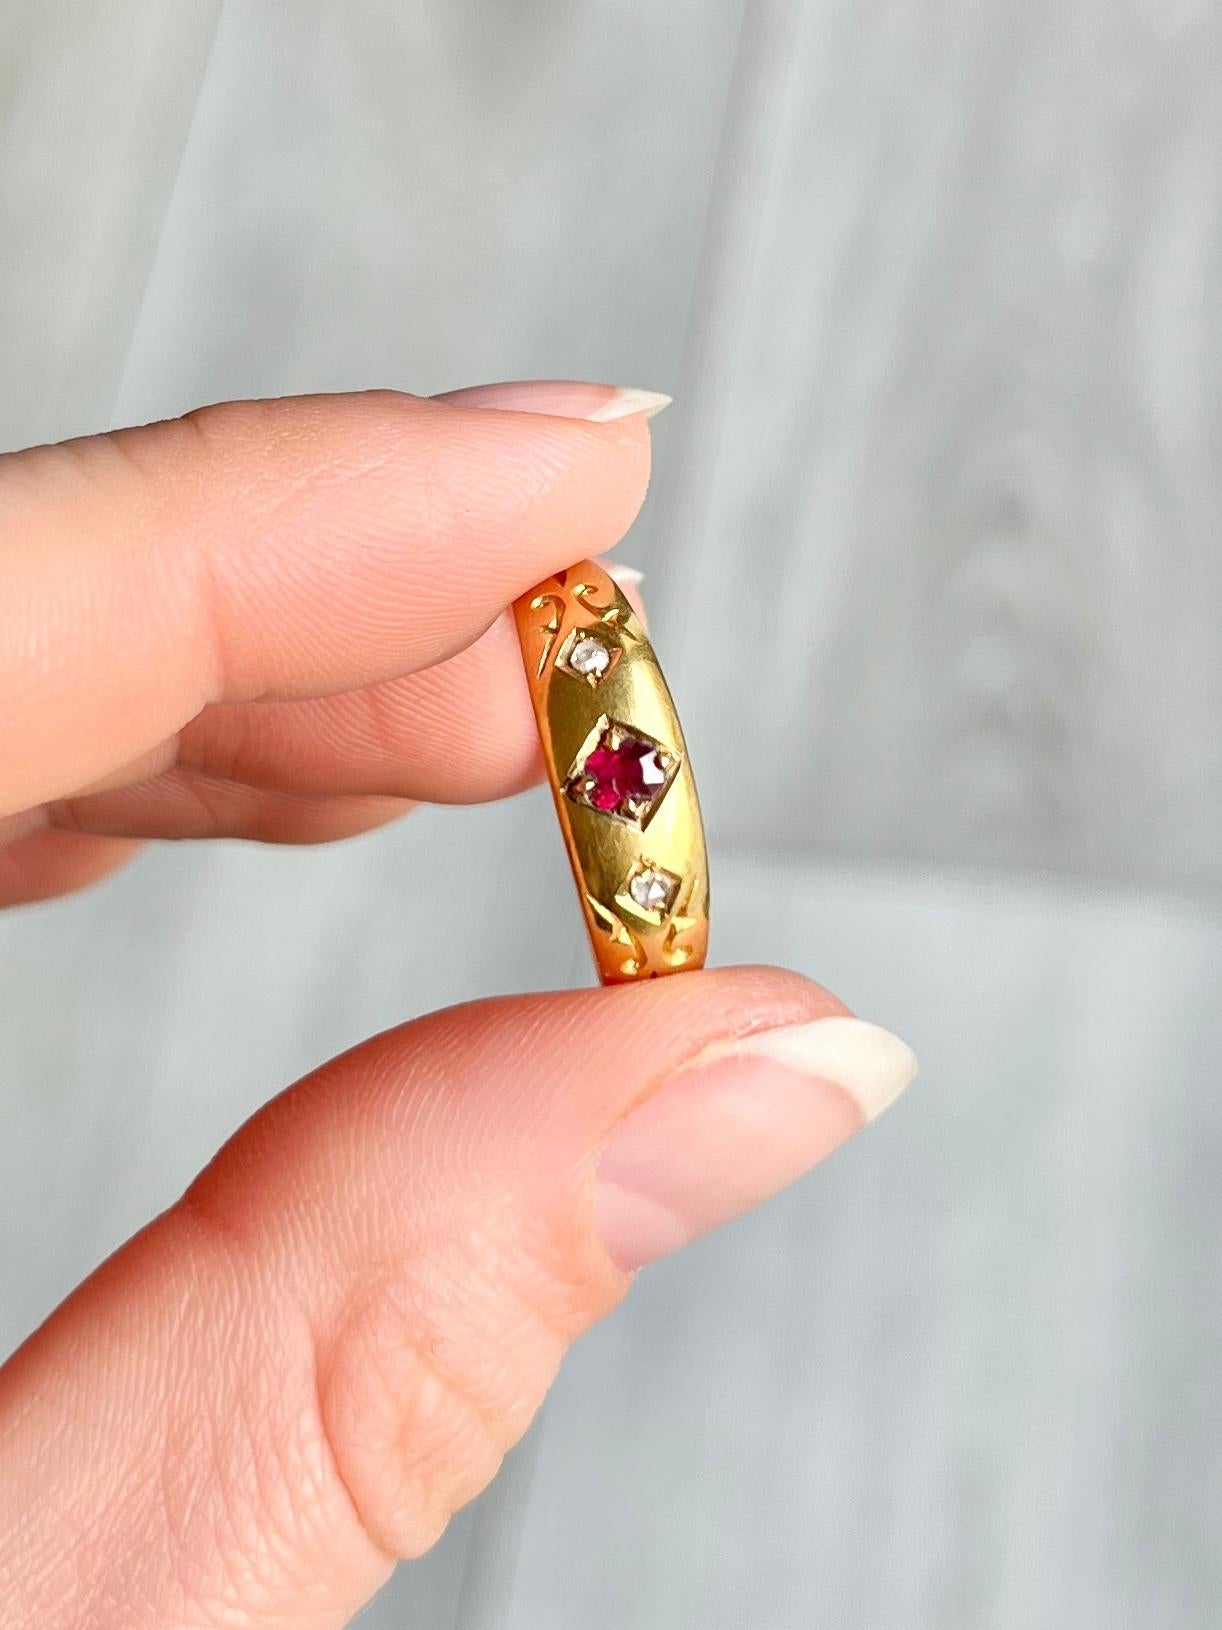 This classic band is modelled in 18carat gold and the Ruby which is set in the diamond shaped setting measures 10pts and the rose cut diamonds measure 3pts each. Hallmarked London 1896.

Size: Q or 8 1/4 
Width: 6mm

Weight: 2.3g
